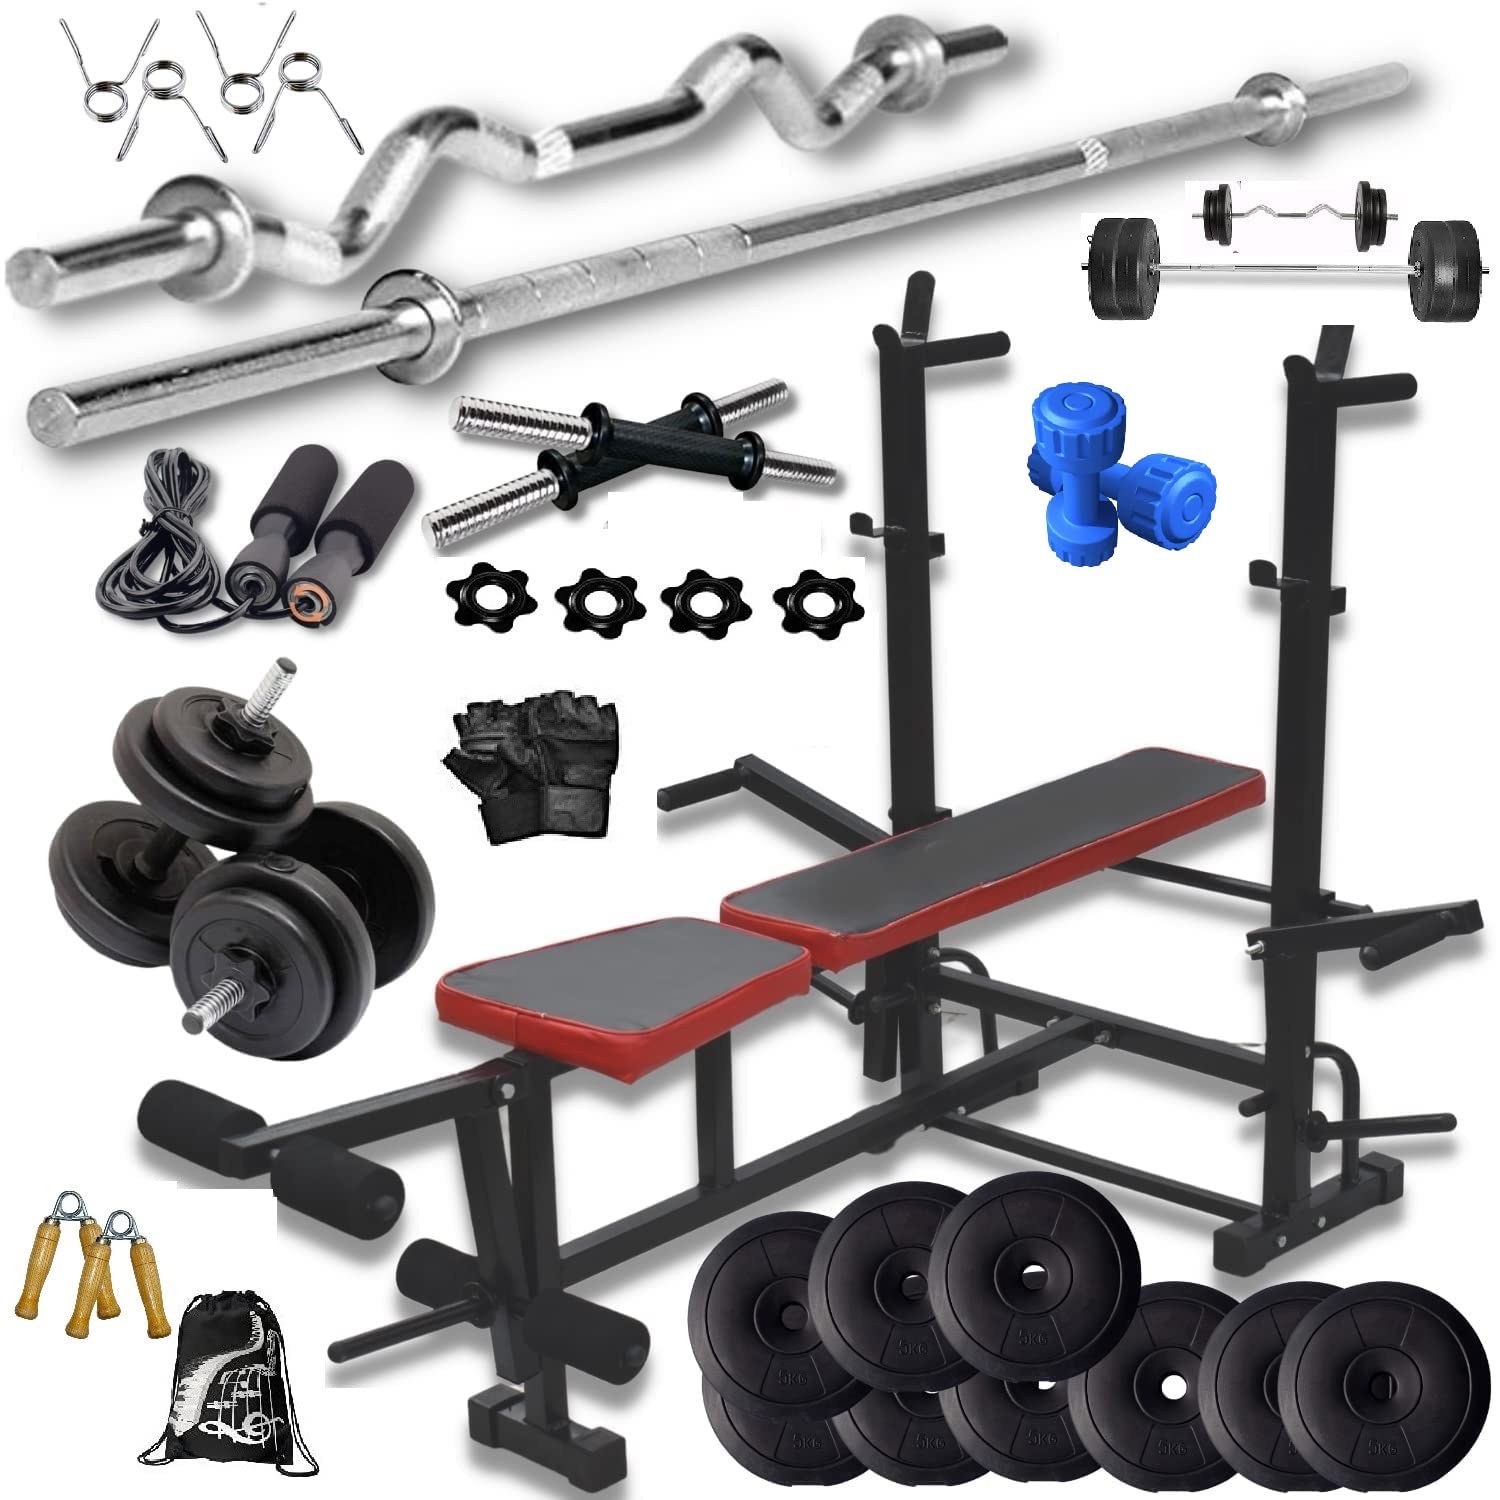 https://www.sportswing.in/wp-content/uploads/2021/12/Bodyfit-Home-Gym-Set-Home-Gym-Equipment-Combo3-Ft-Curl-5-Ft-Plain-Rod-and-1-Pair-Dumbbell-Rods-8-in-1-Gym-Bench-Fitness-Bench-Home-Gym-Equipment-Gym-Accessories-3.jpg